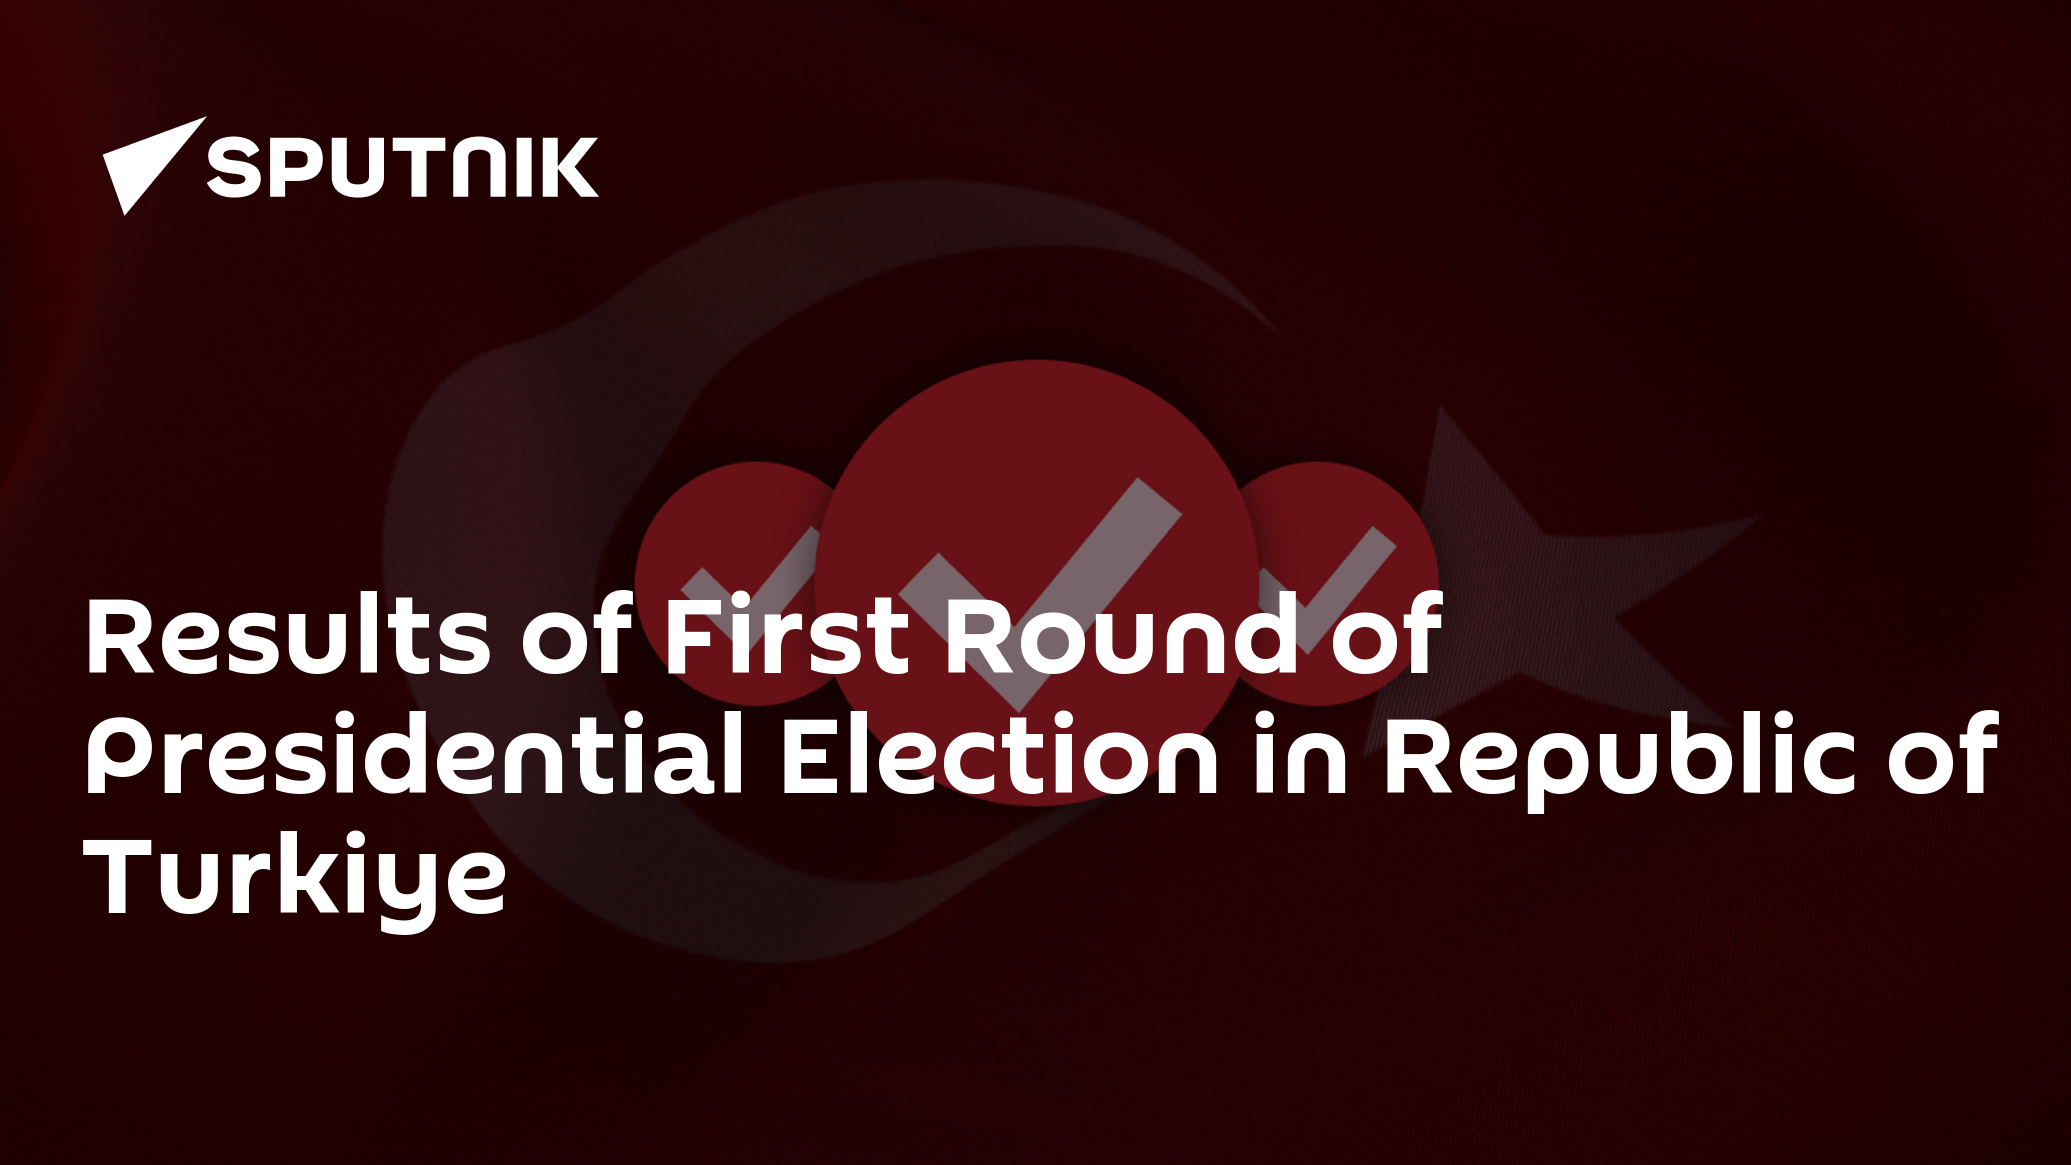 Turkish Election Council Announces 1st Ever Presidential Runoff on May 28